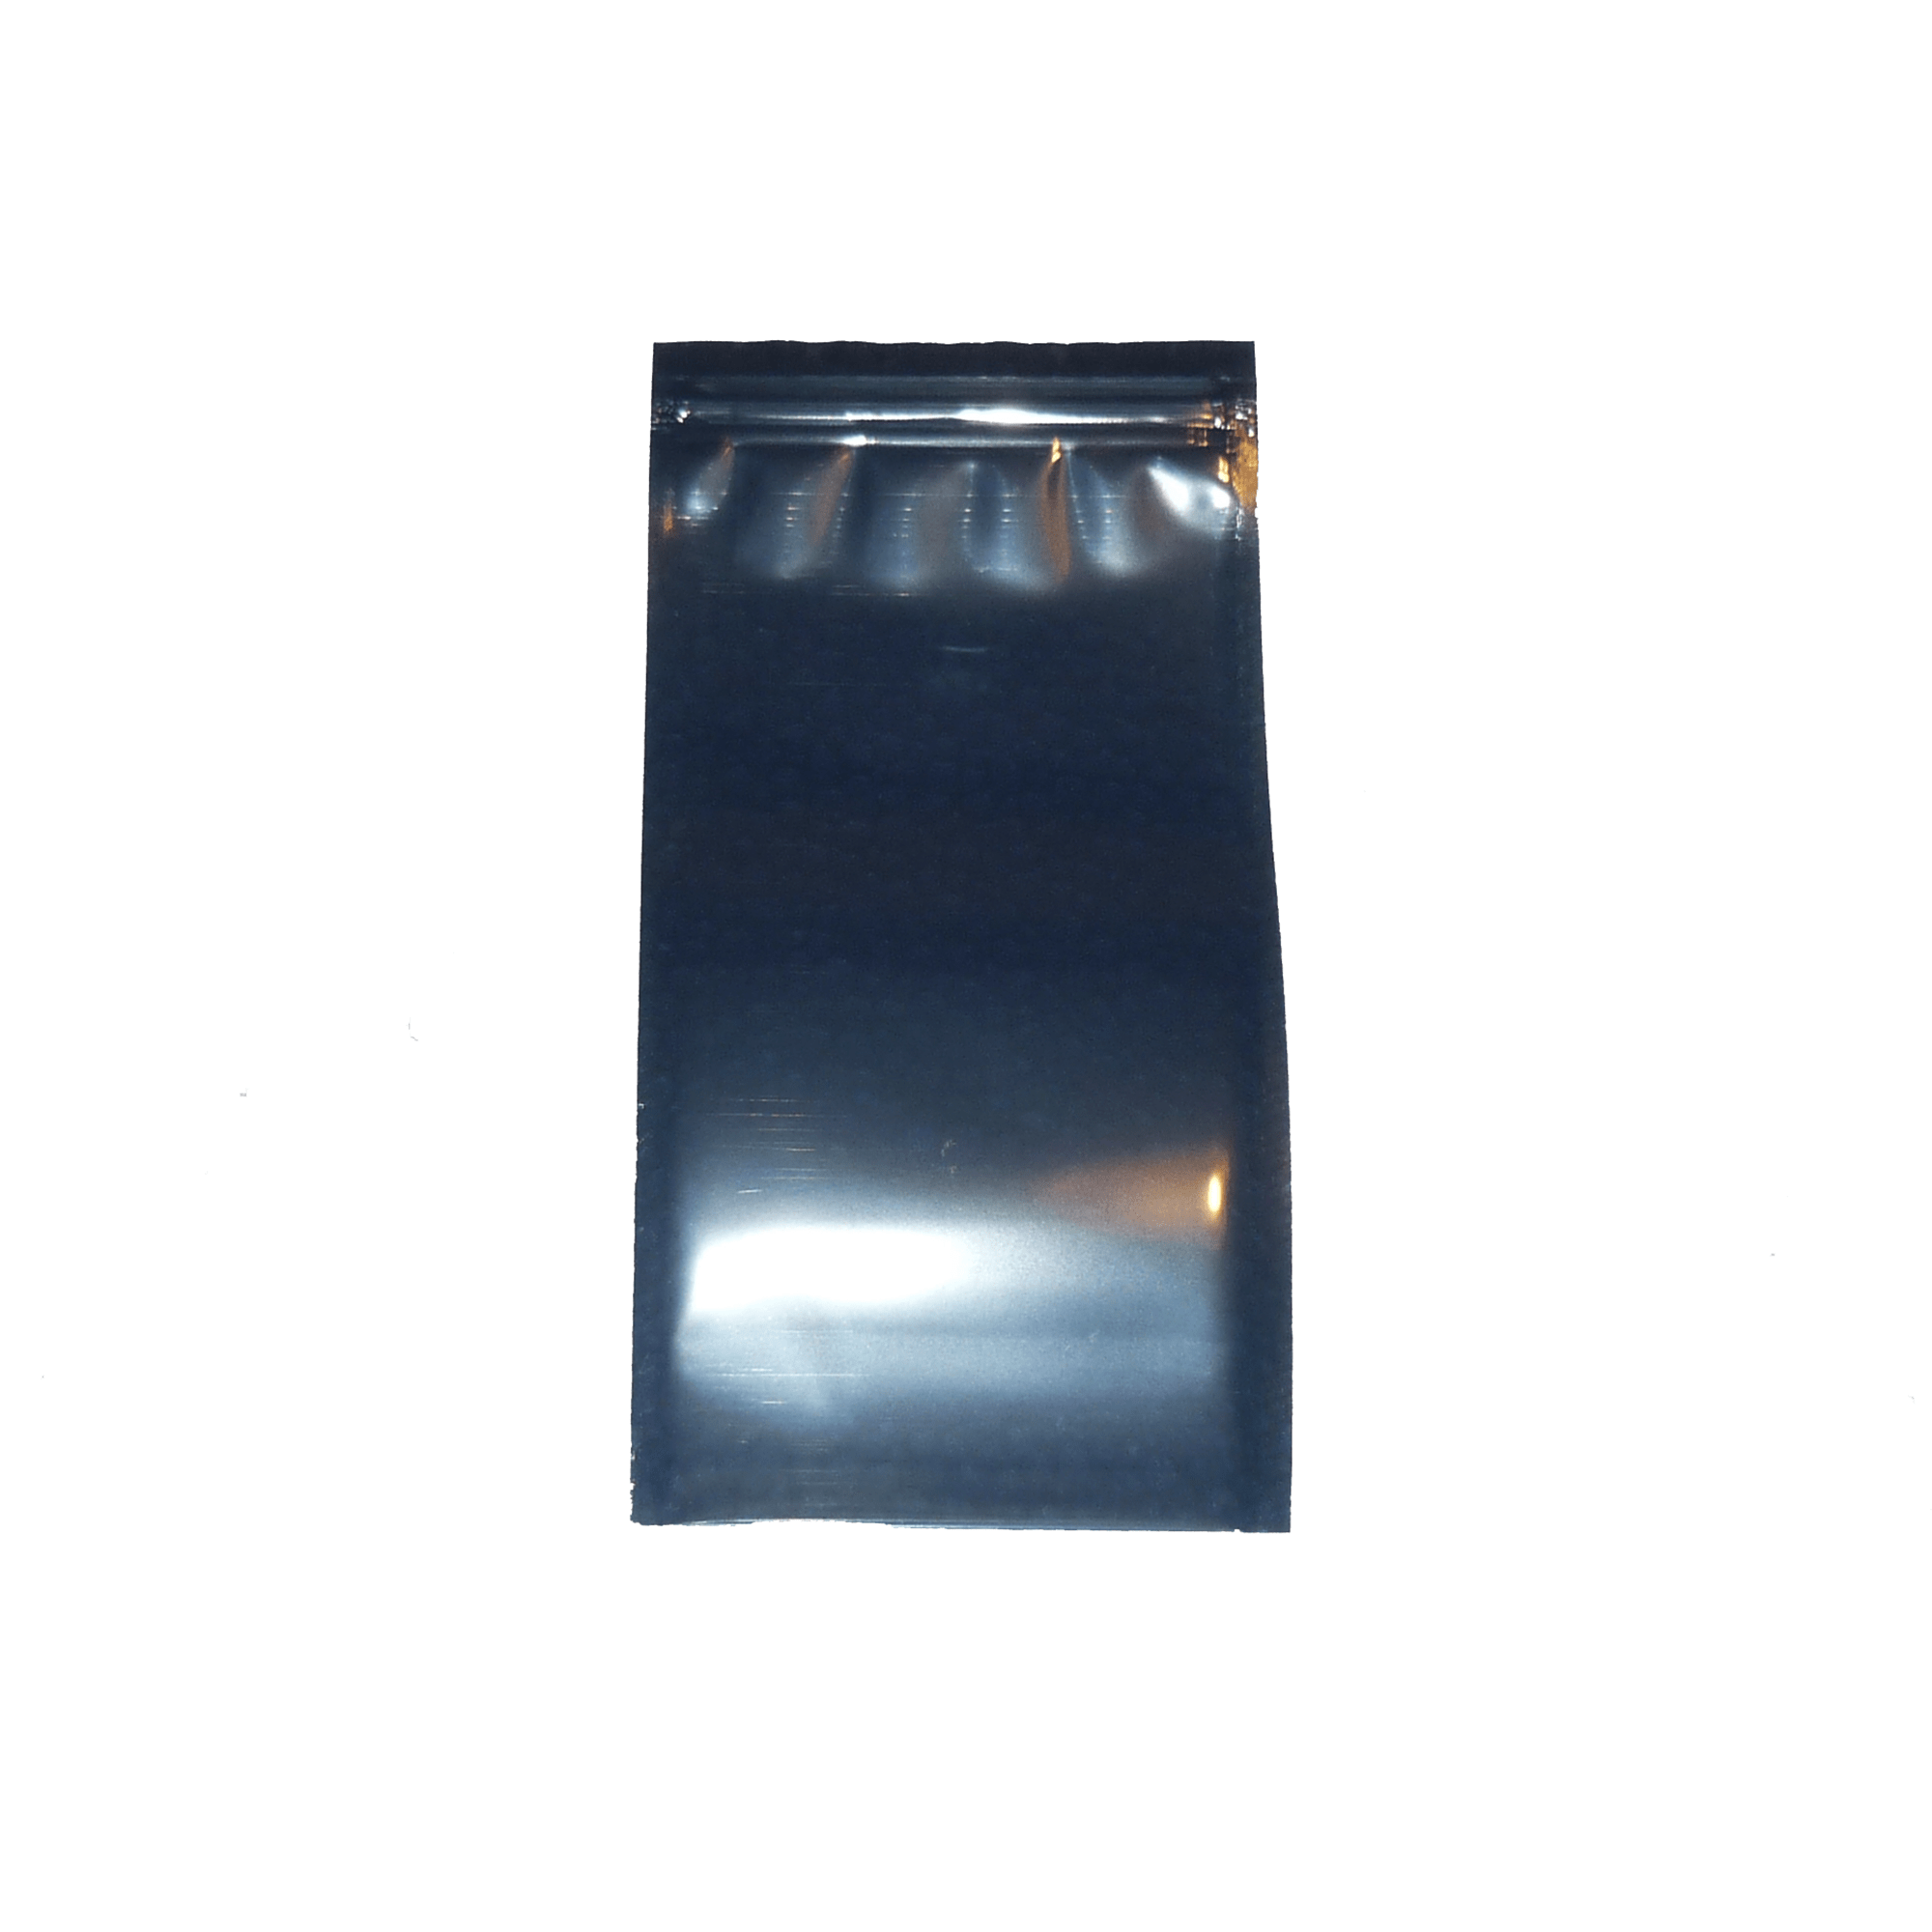 New Click Seal Reusable Metallised Anti-Static Bags ideal for temporary safe storage or shipping, protects delicate ESD Devices from Static Discharge Damage and Moisture. Flat Pouch, Metallised, Grey, 50% Transparent, Click Seal to Shortest Side. Bags can be Heat Sealed if Required for Extra Security.